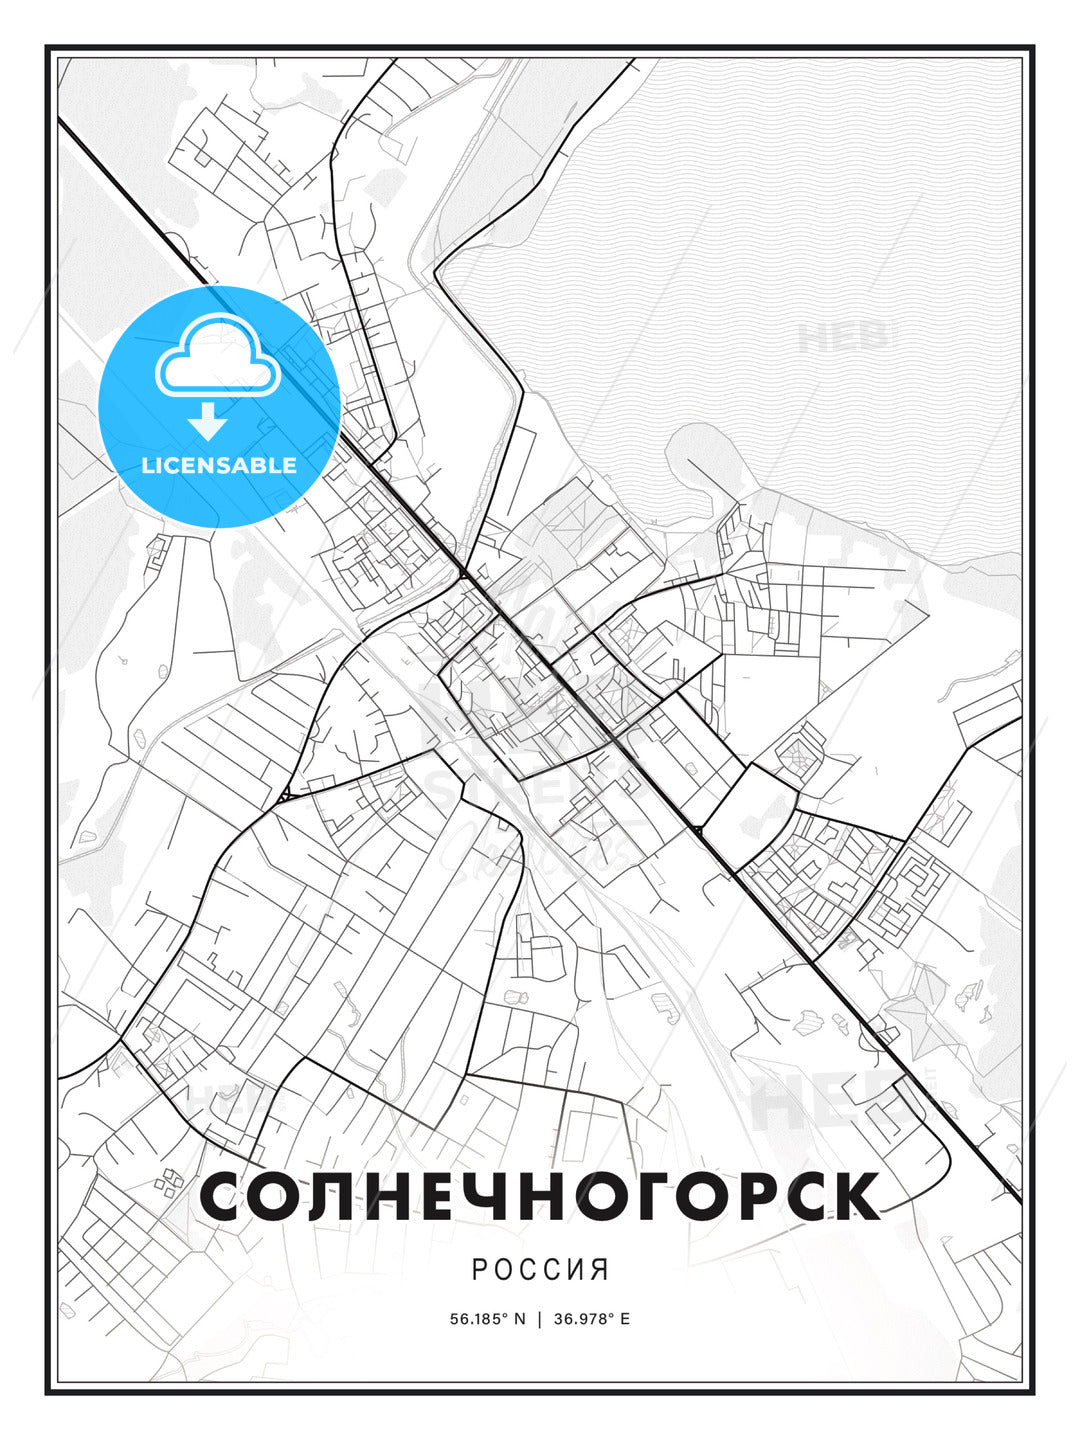 СОЛНЕЧНОГОРСК / Solnechnogorsk, Russia, Modern Print Template in Various Formats - HEBSTREITS Sketches